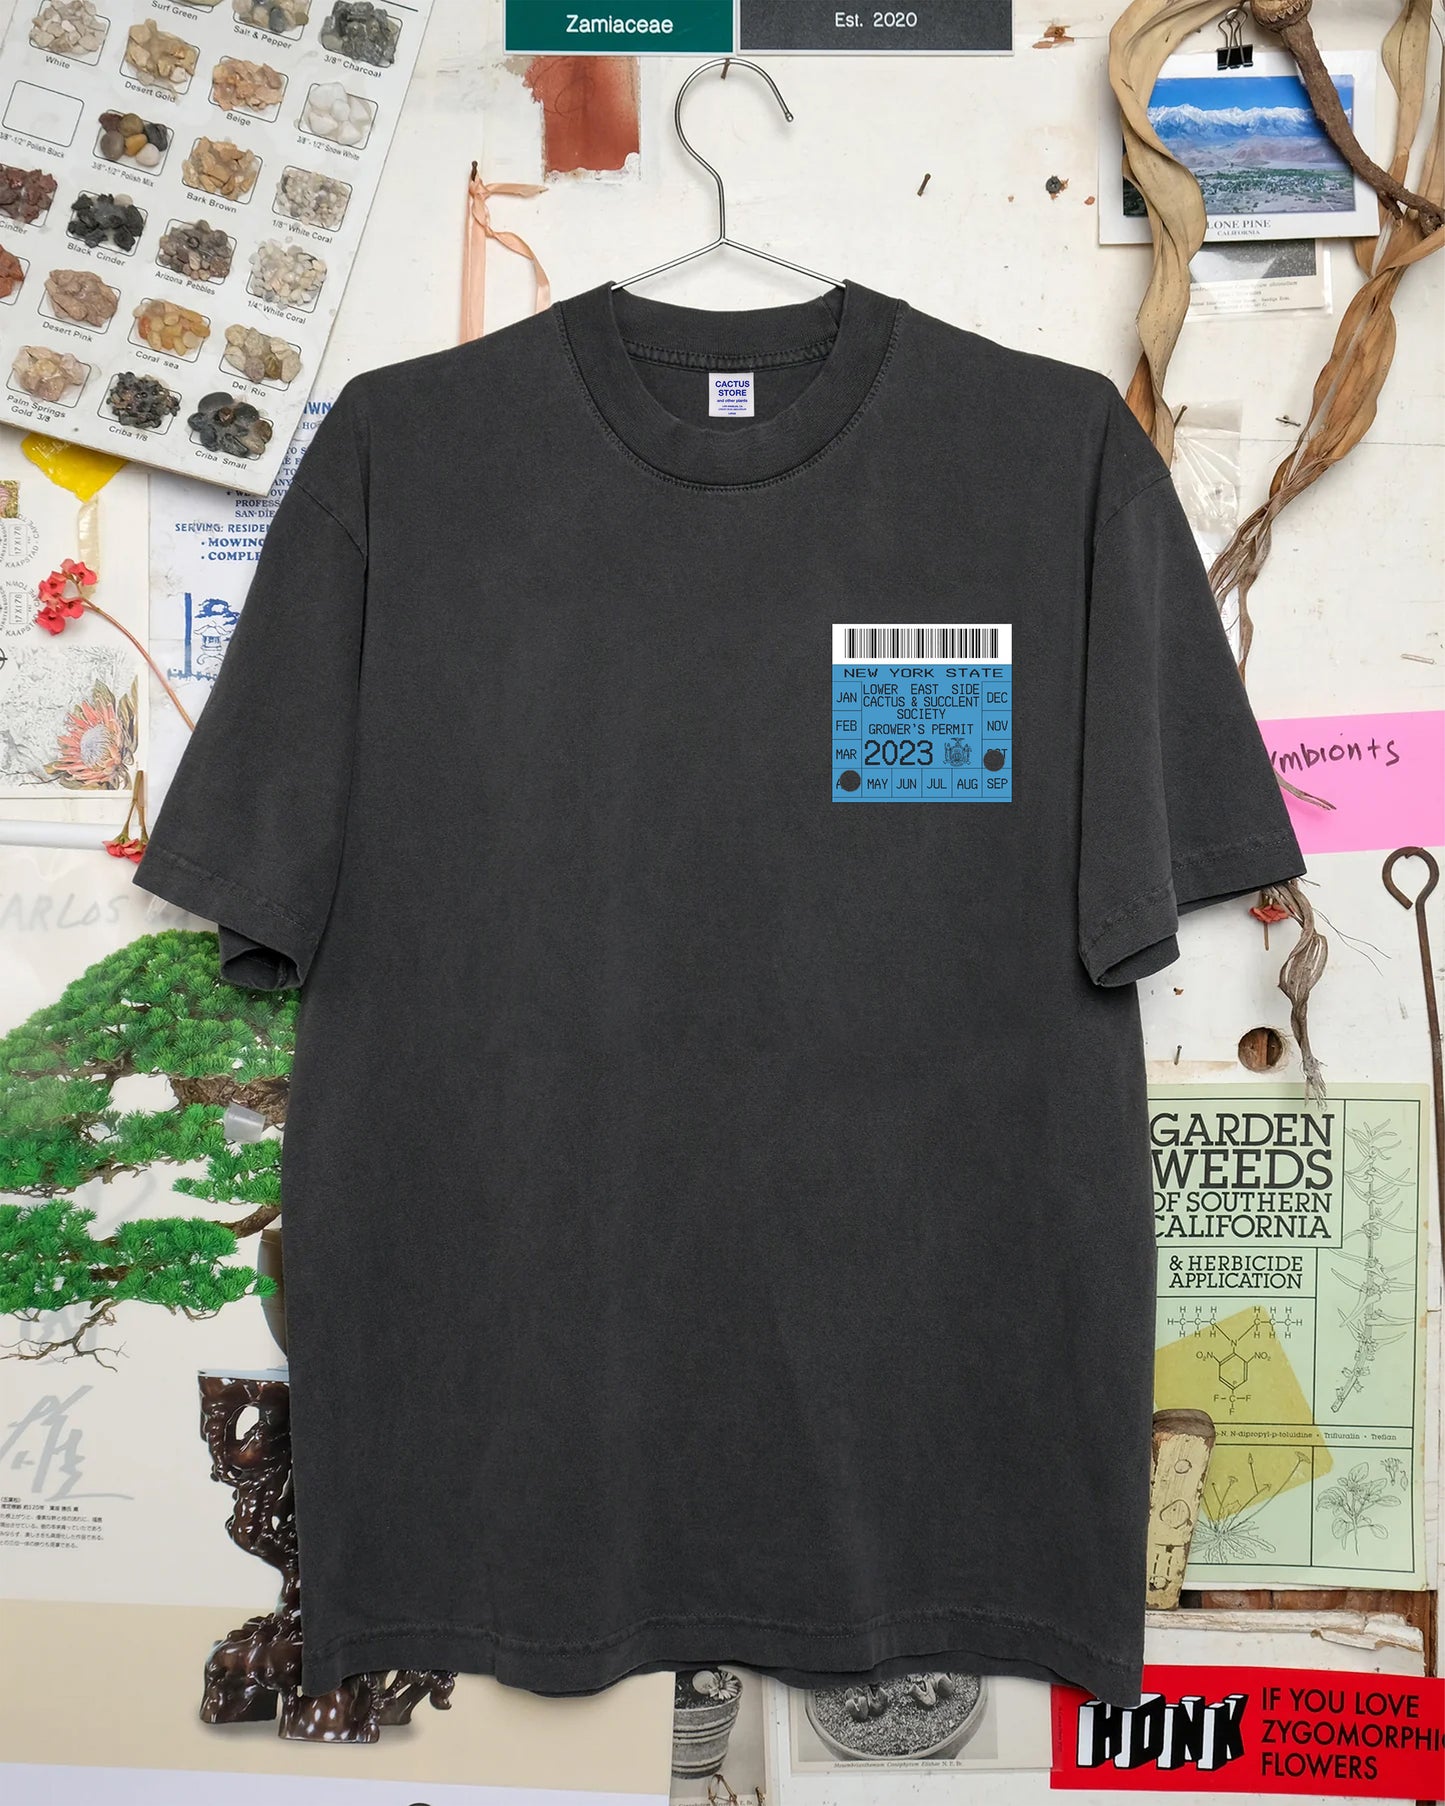 Lower East Side Cactus & Succulent Society 2023 Shirt